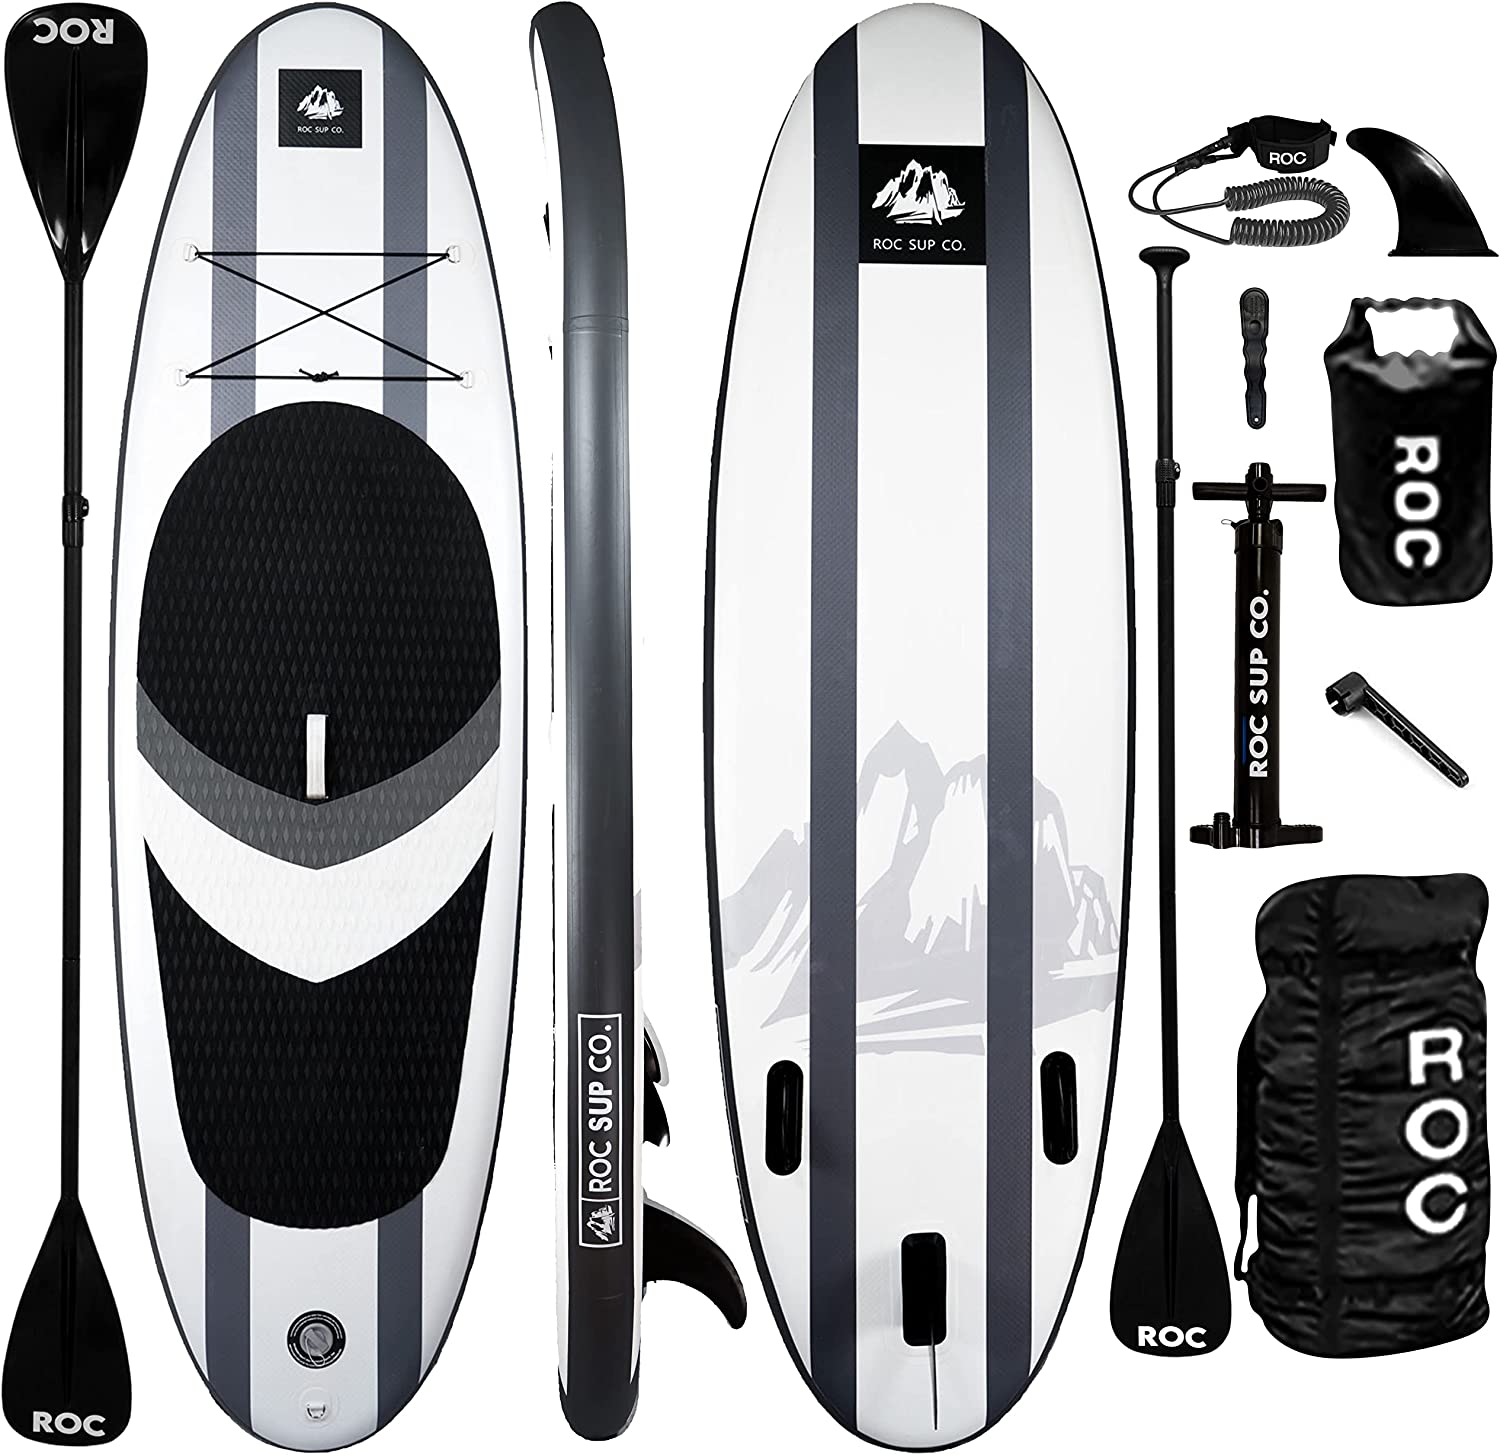 https://bigbigmart.com/wp-content/uploads/2023/05/Roc-Inflatable-Stand-Up-Paddle-Boards-with-Premium-SUP-Paddle-Board-Accessories-Wide-Stable-Design-Non-Slip-Comfort-Deck-for-Youth-Adults%E2%80%A6-Charcoal.jpg